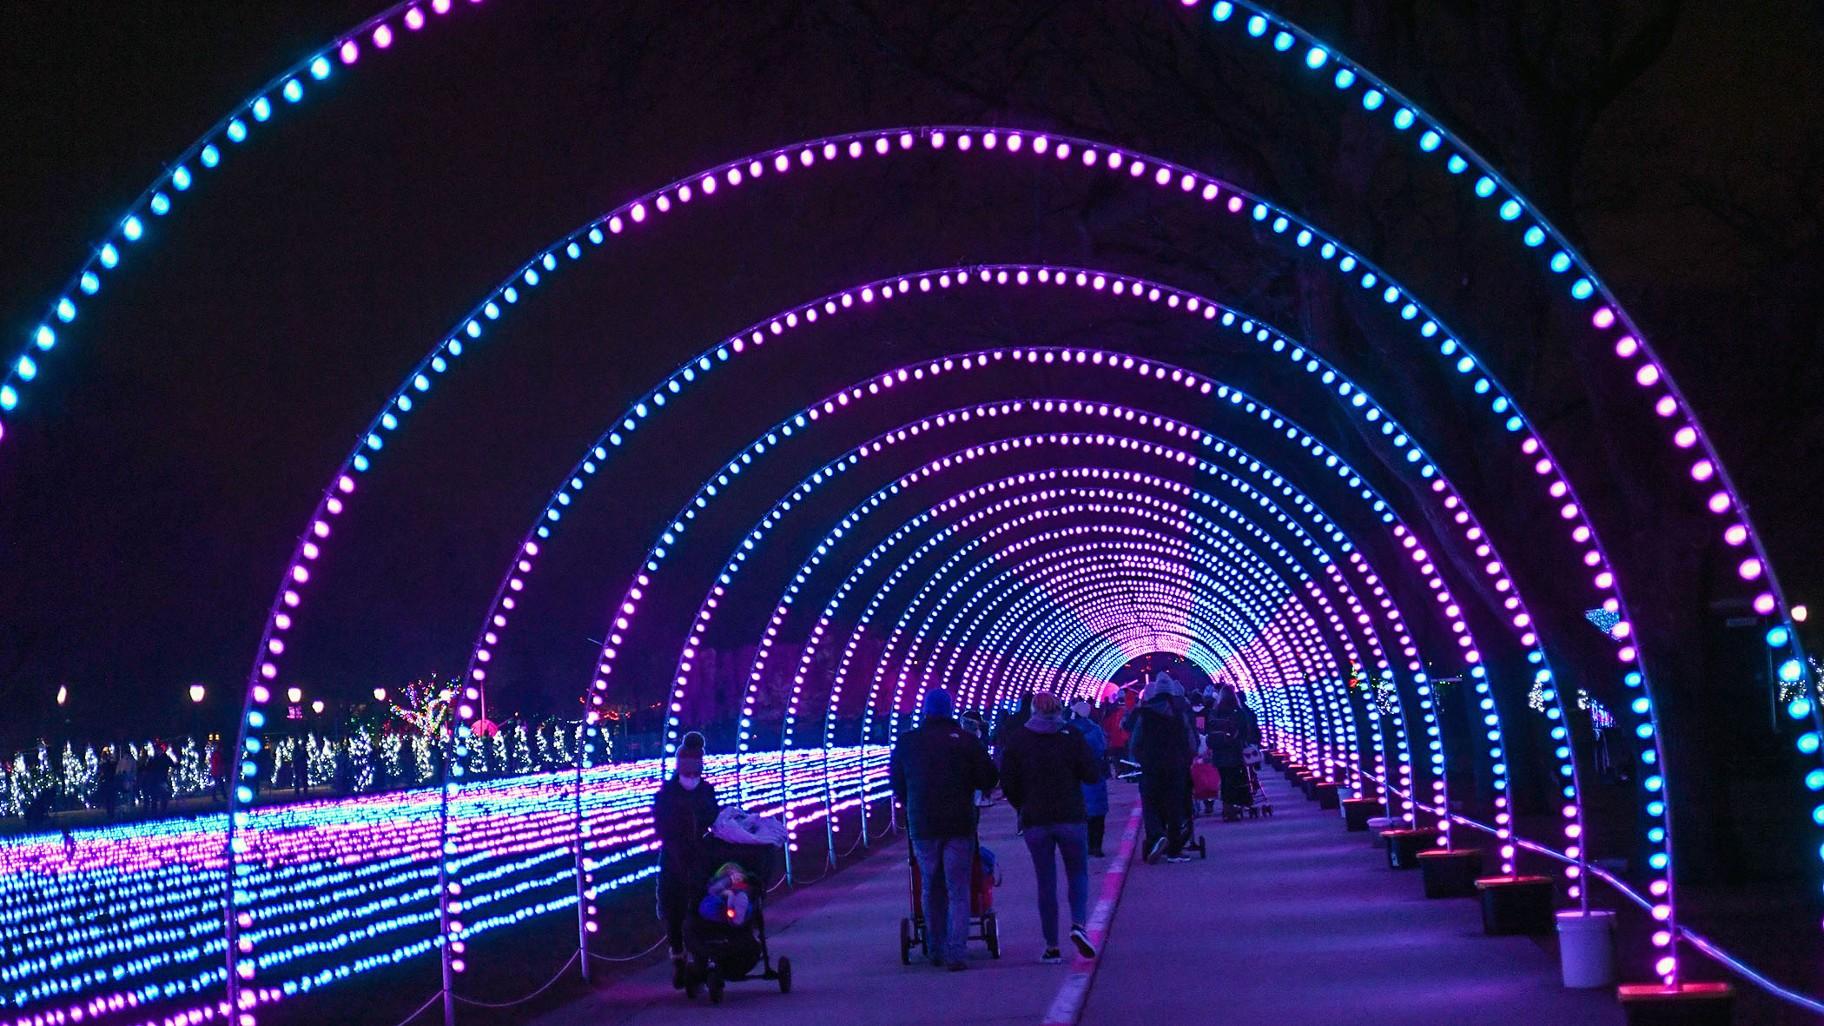 Guests can walk through the 600-foot Tunnel of Lights synchronized to music at Brookfield Zoo’s Holiday Magic. (Courtesy of CZS-Brookfield Zoo)